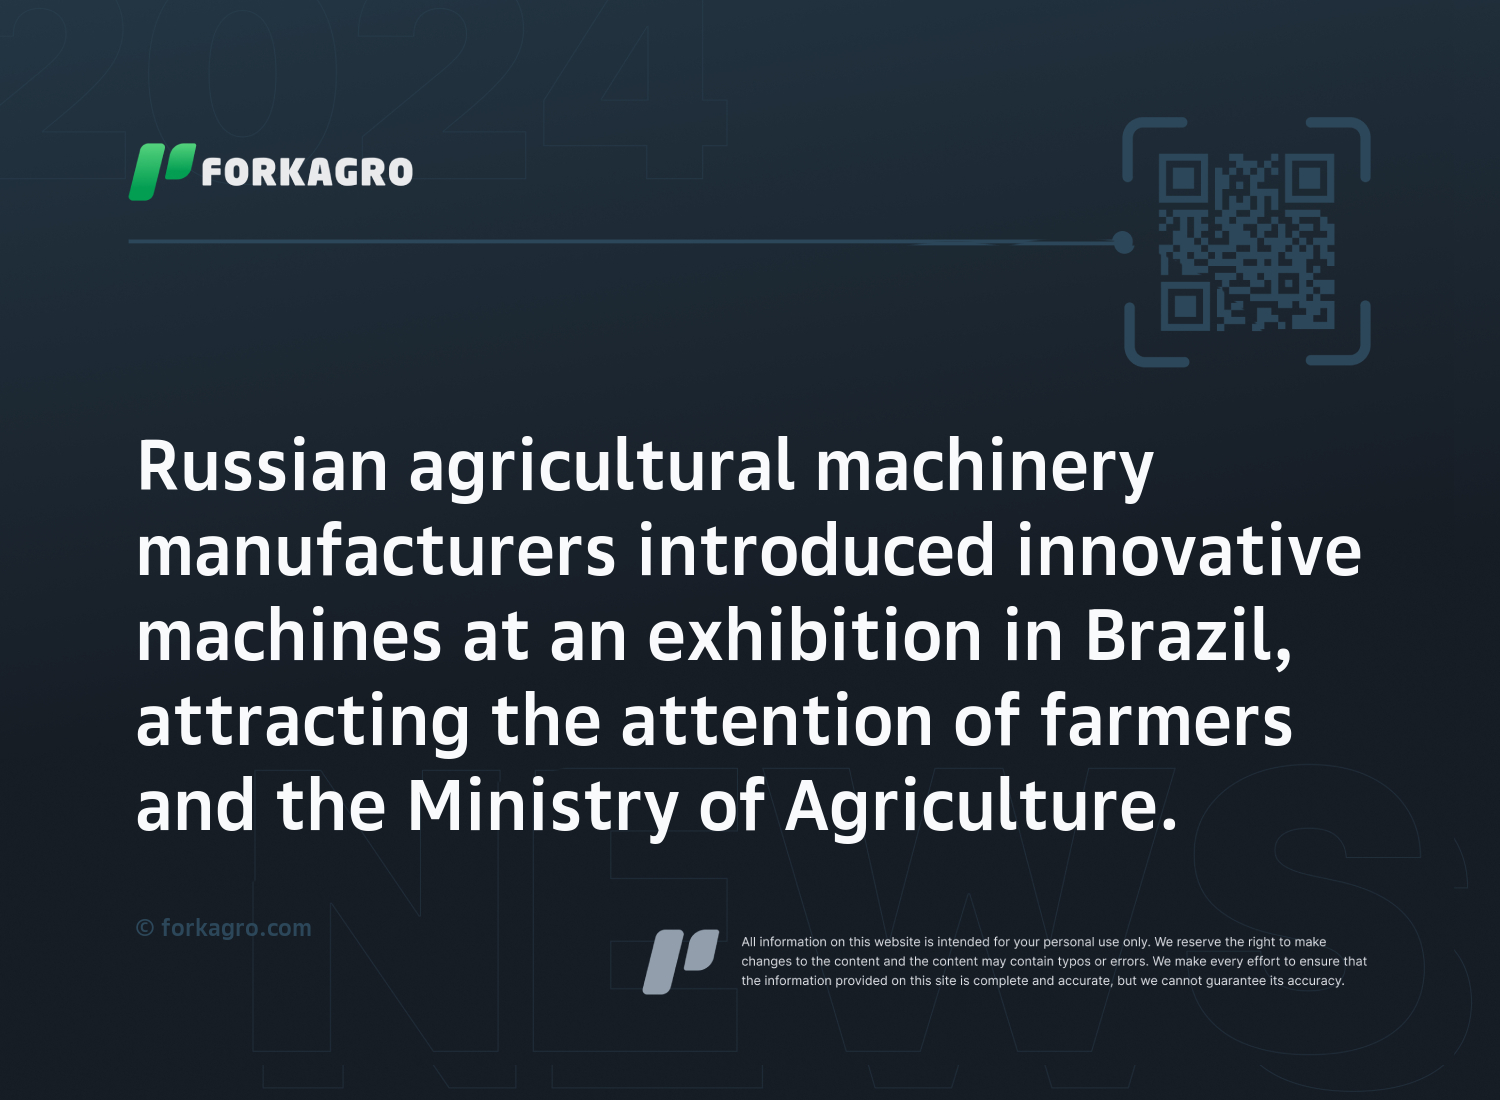 Russian agricultural machinery manufacturers introduced innovative machines at an exhibition in Brazil, attracting the attention of farmers and the Ministry of Agriculture.